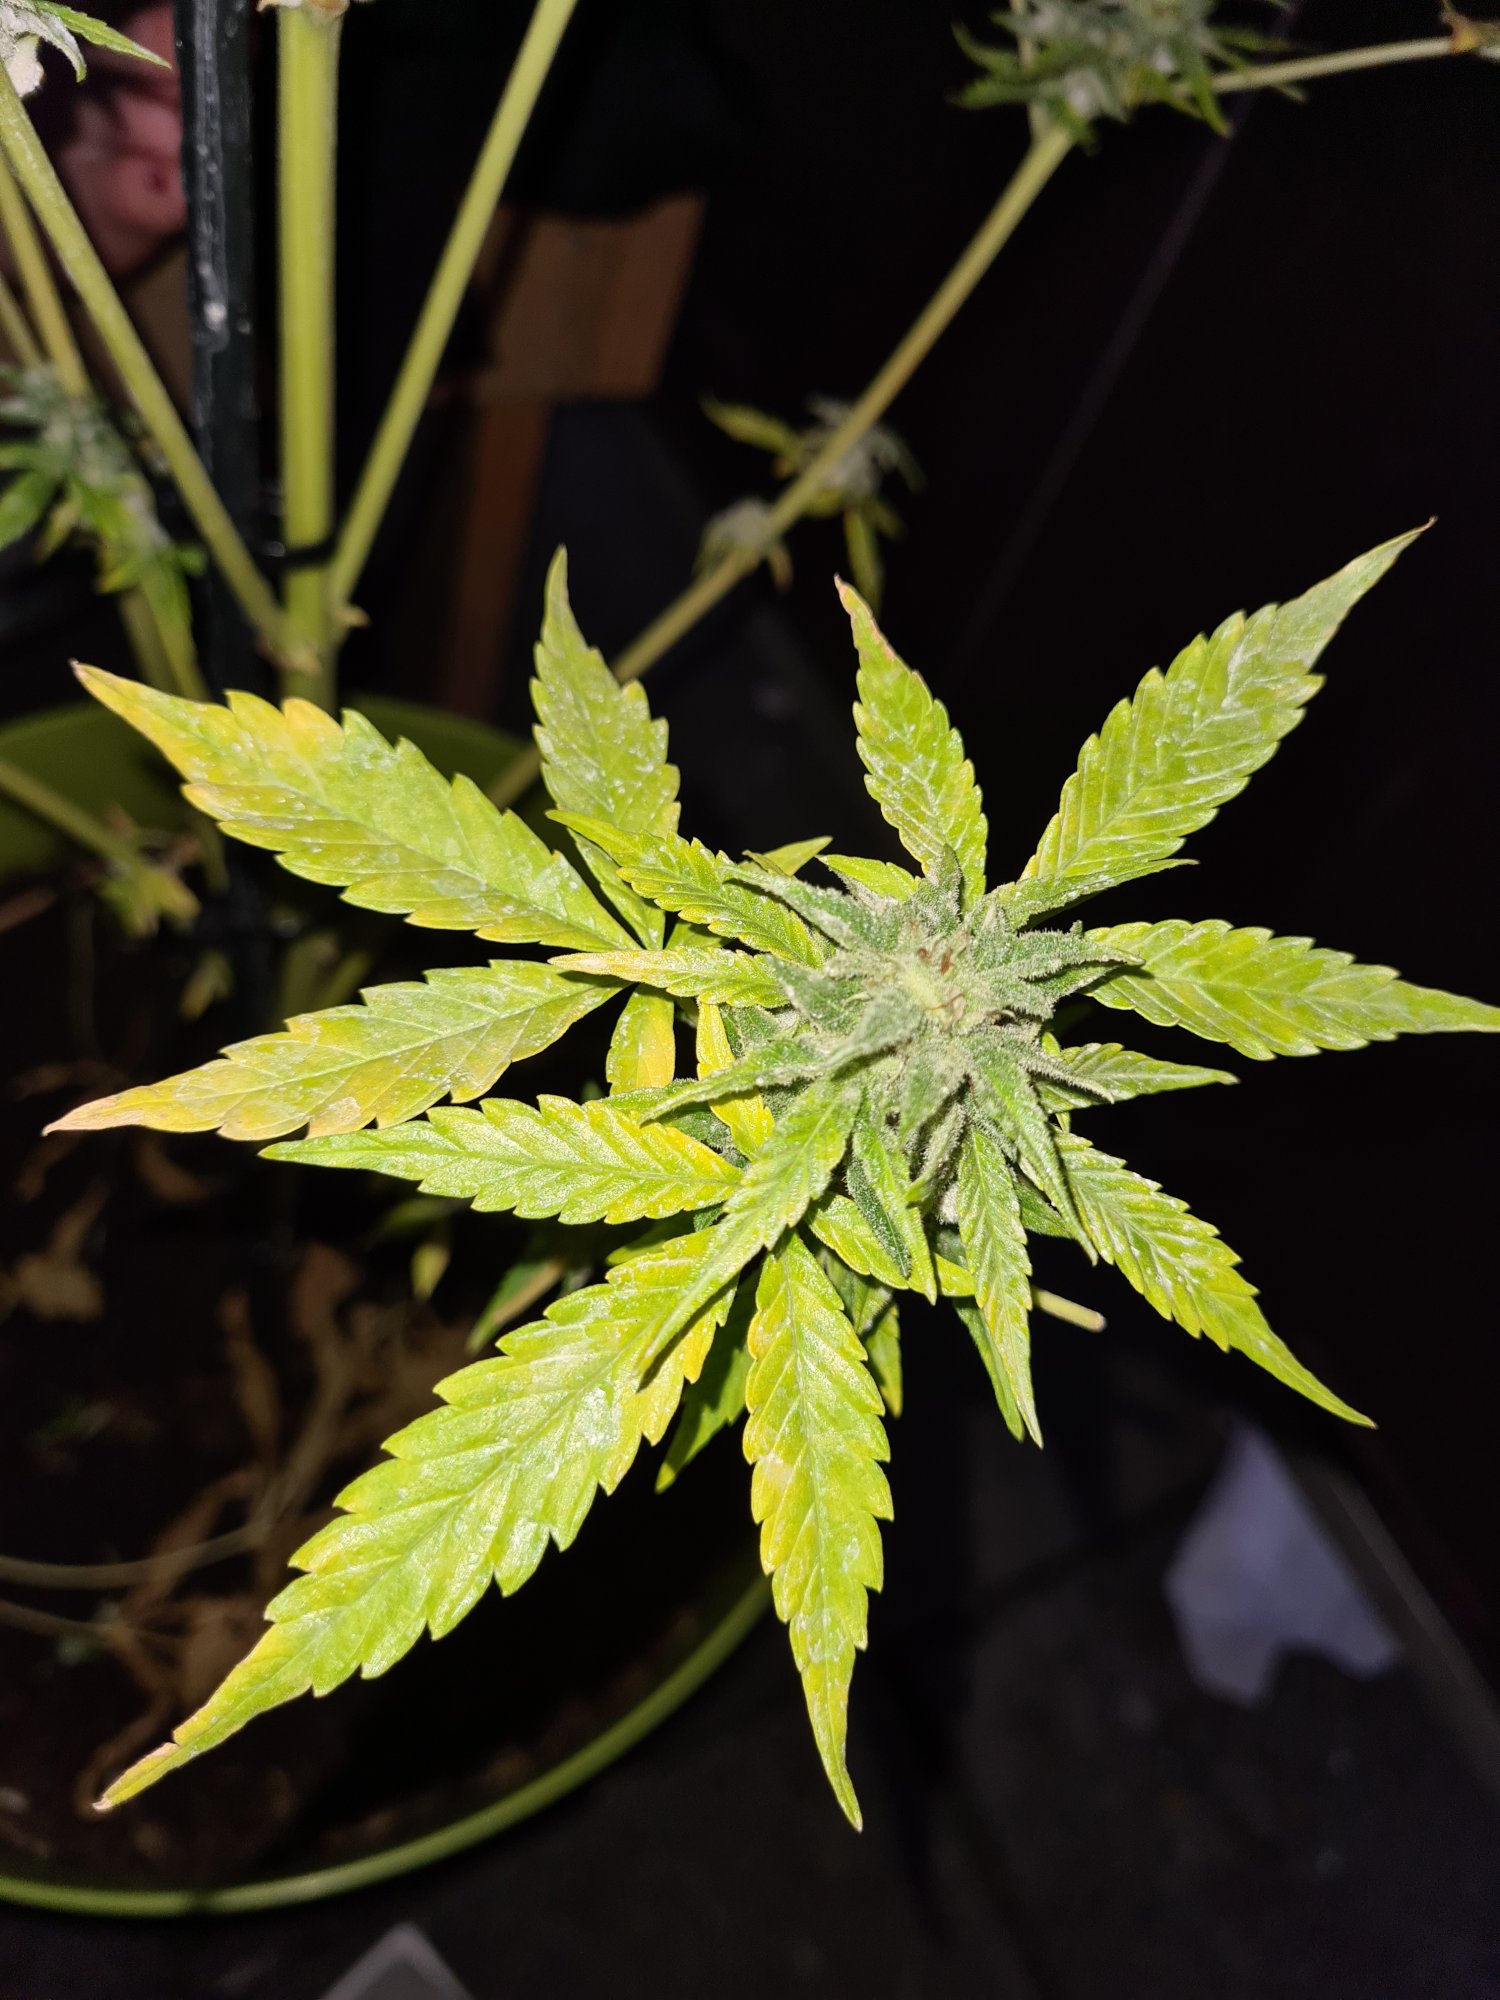 Is this mildew and what should i do